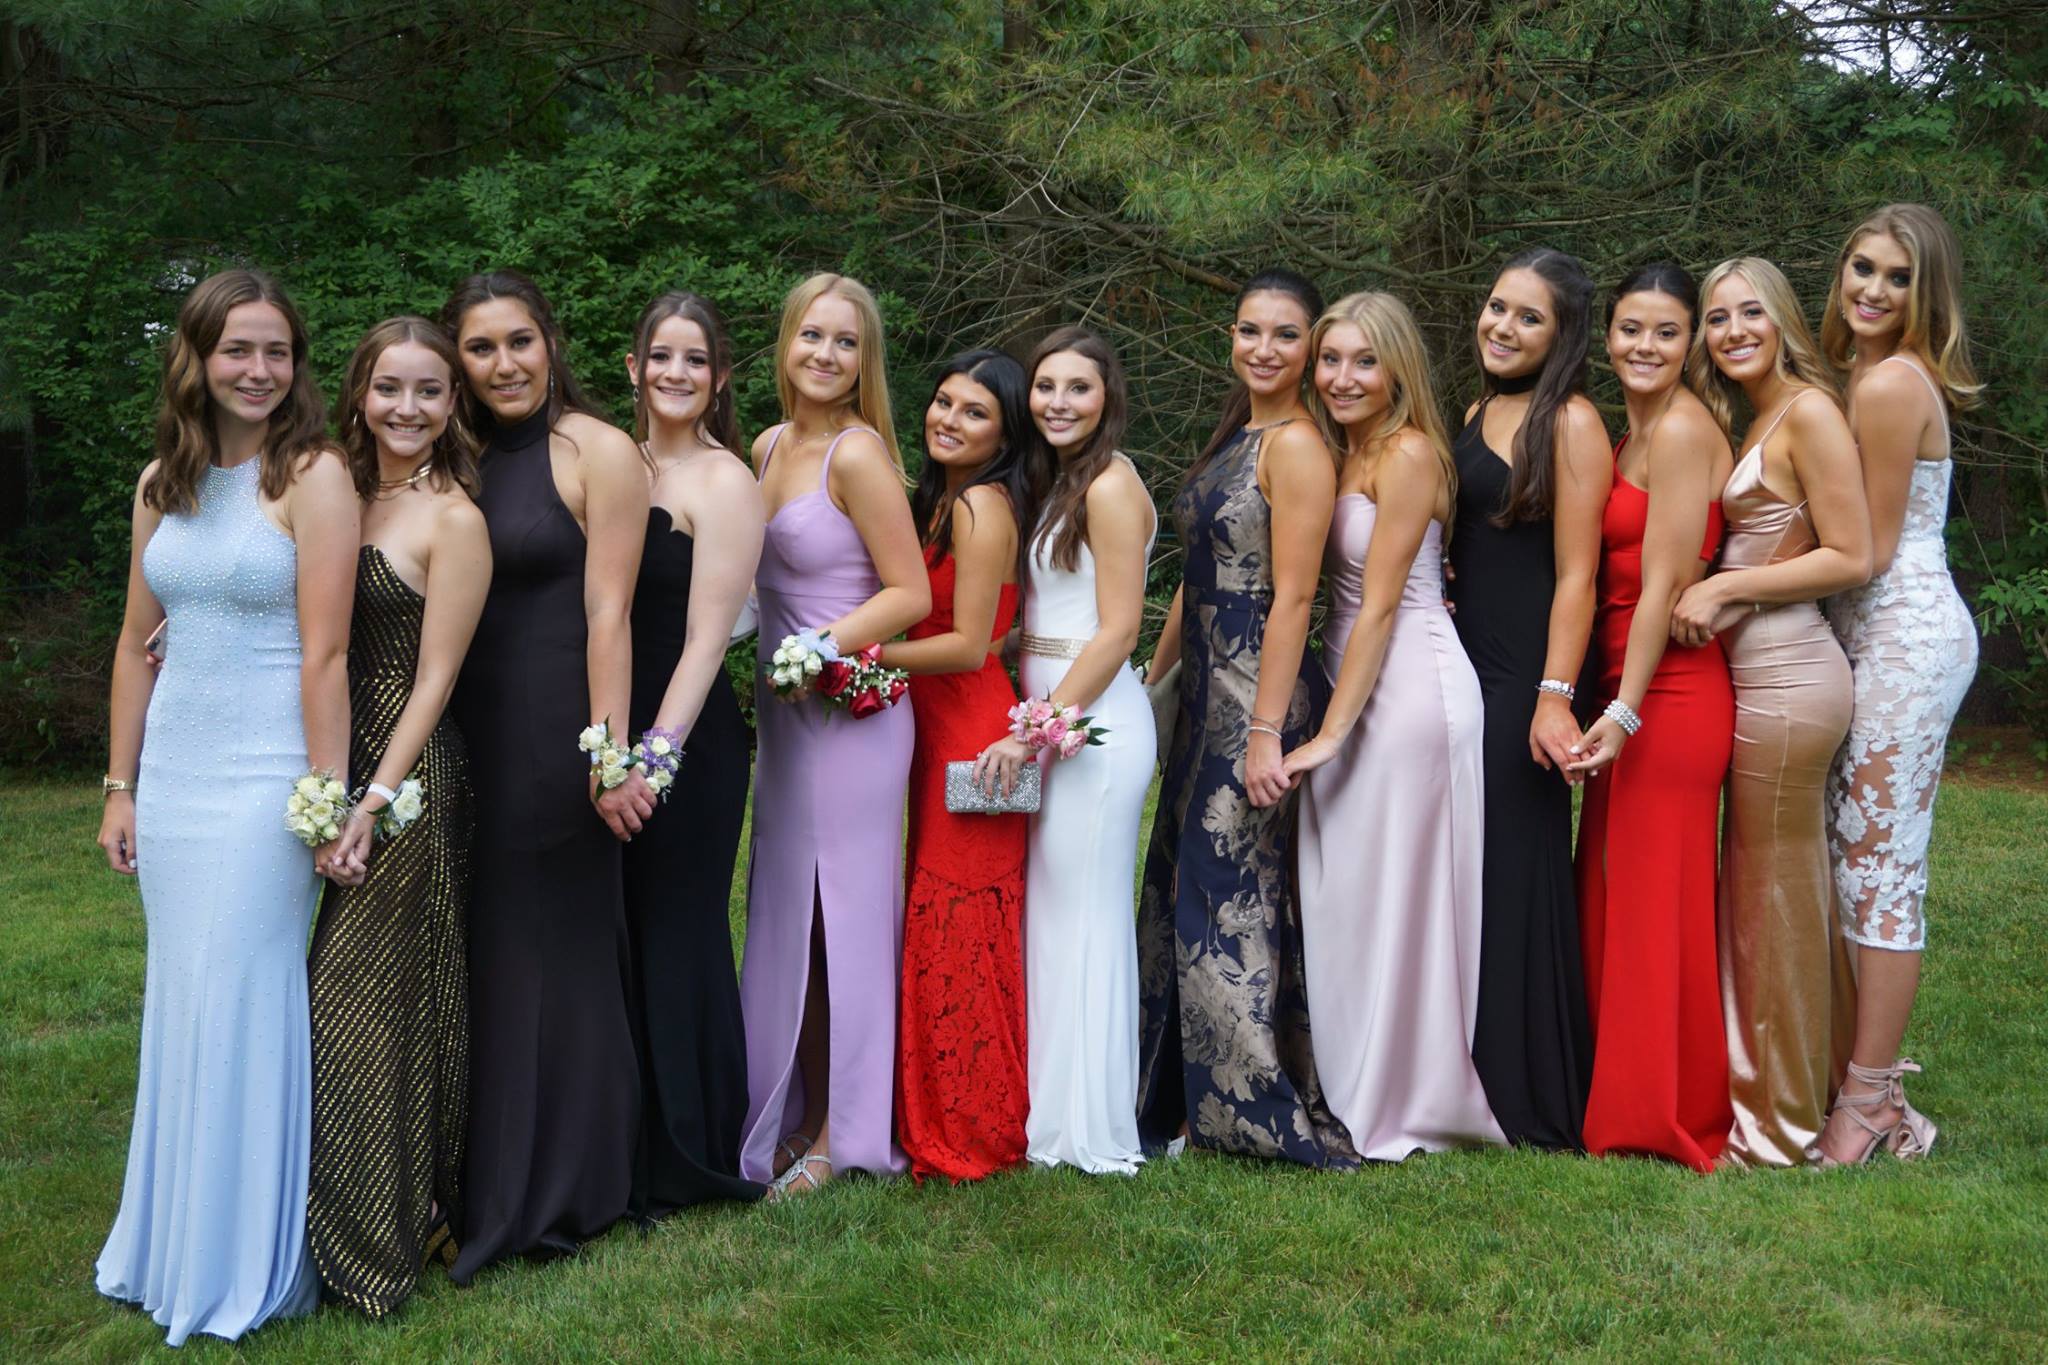 high school prom Archives - The Inside Press